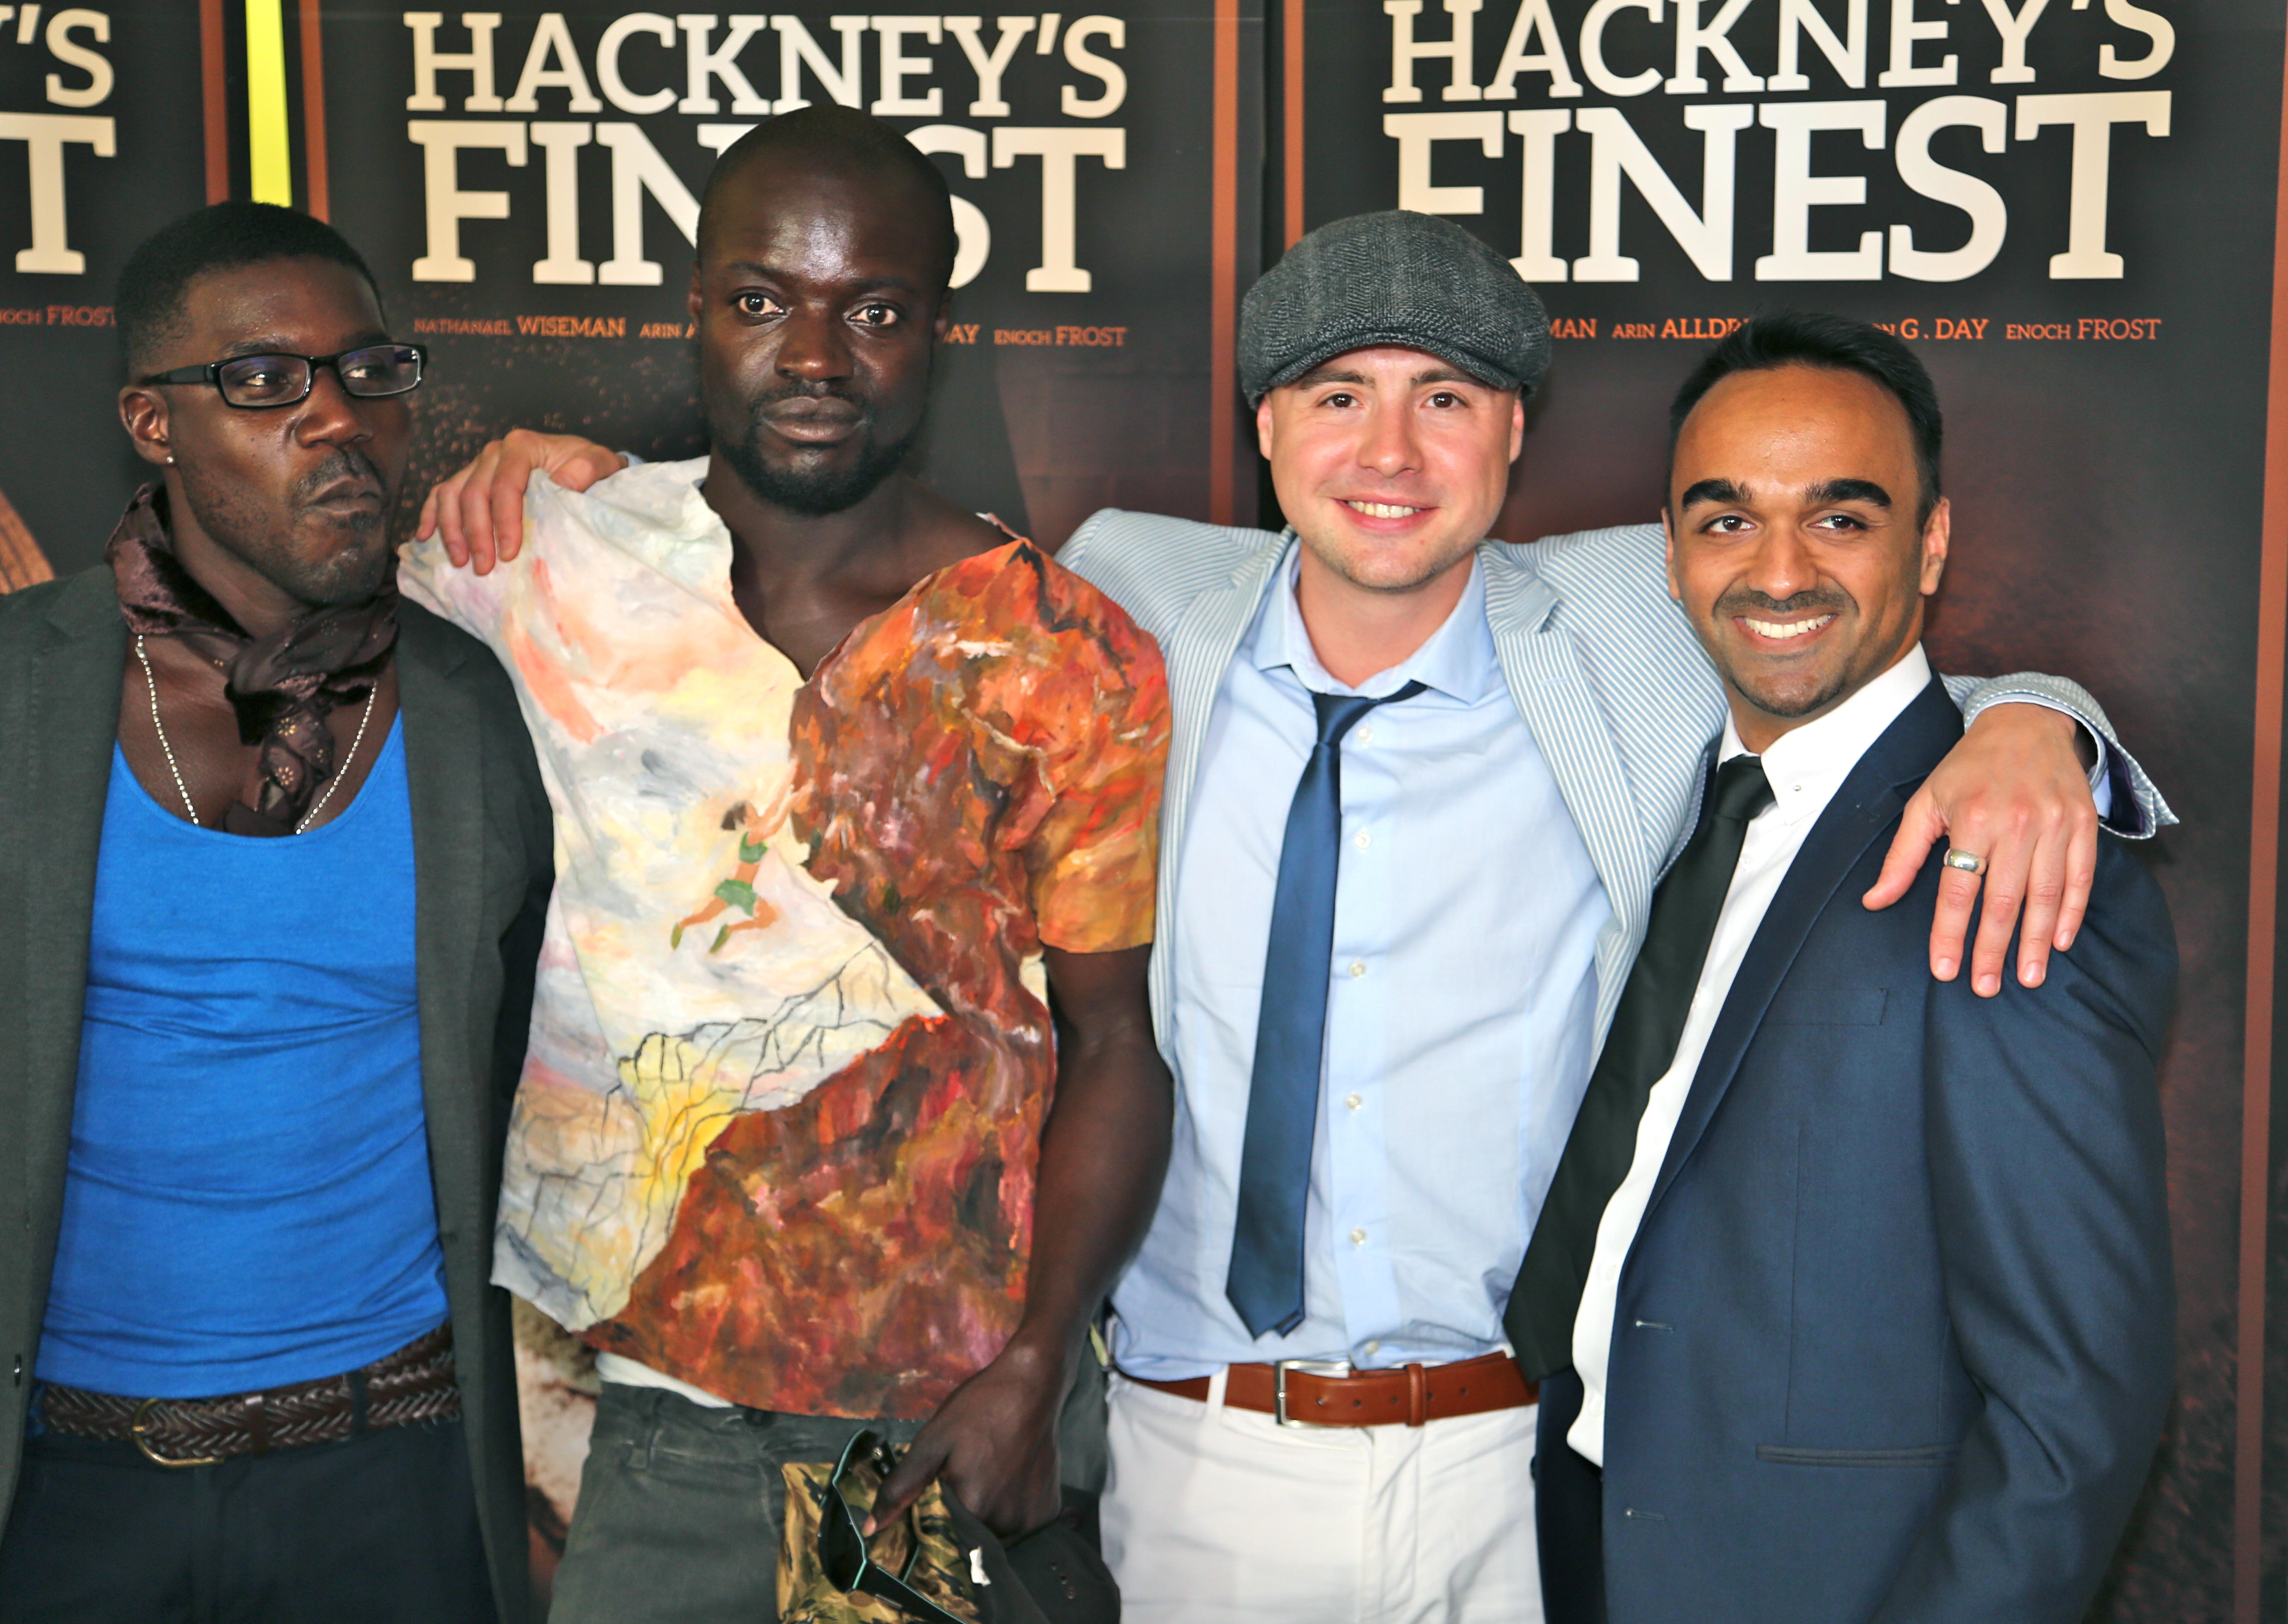 Marlon G Day, Enoch Frost, Nate Wiseman and Raj Sharma at the Hackney's Finest premier